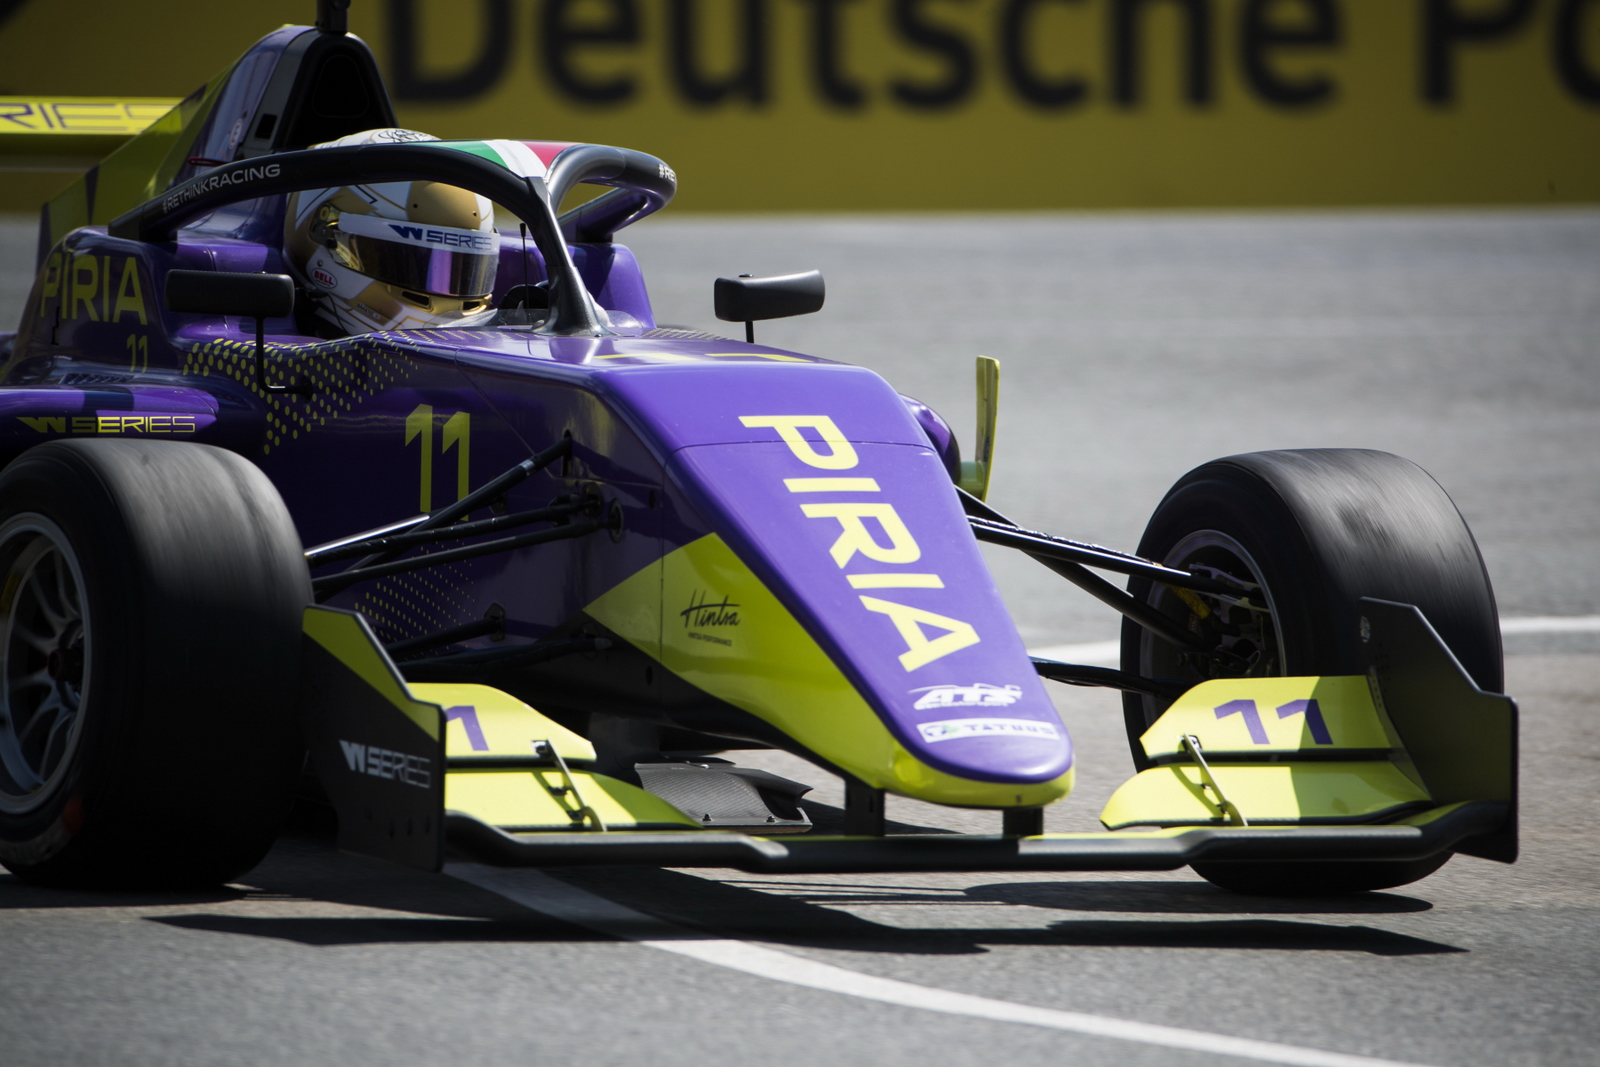 Wseries, round 4: friday in high resolution images.